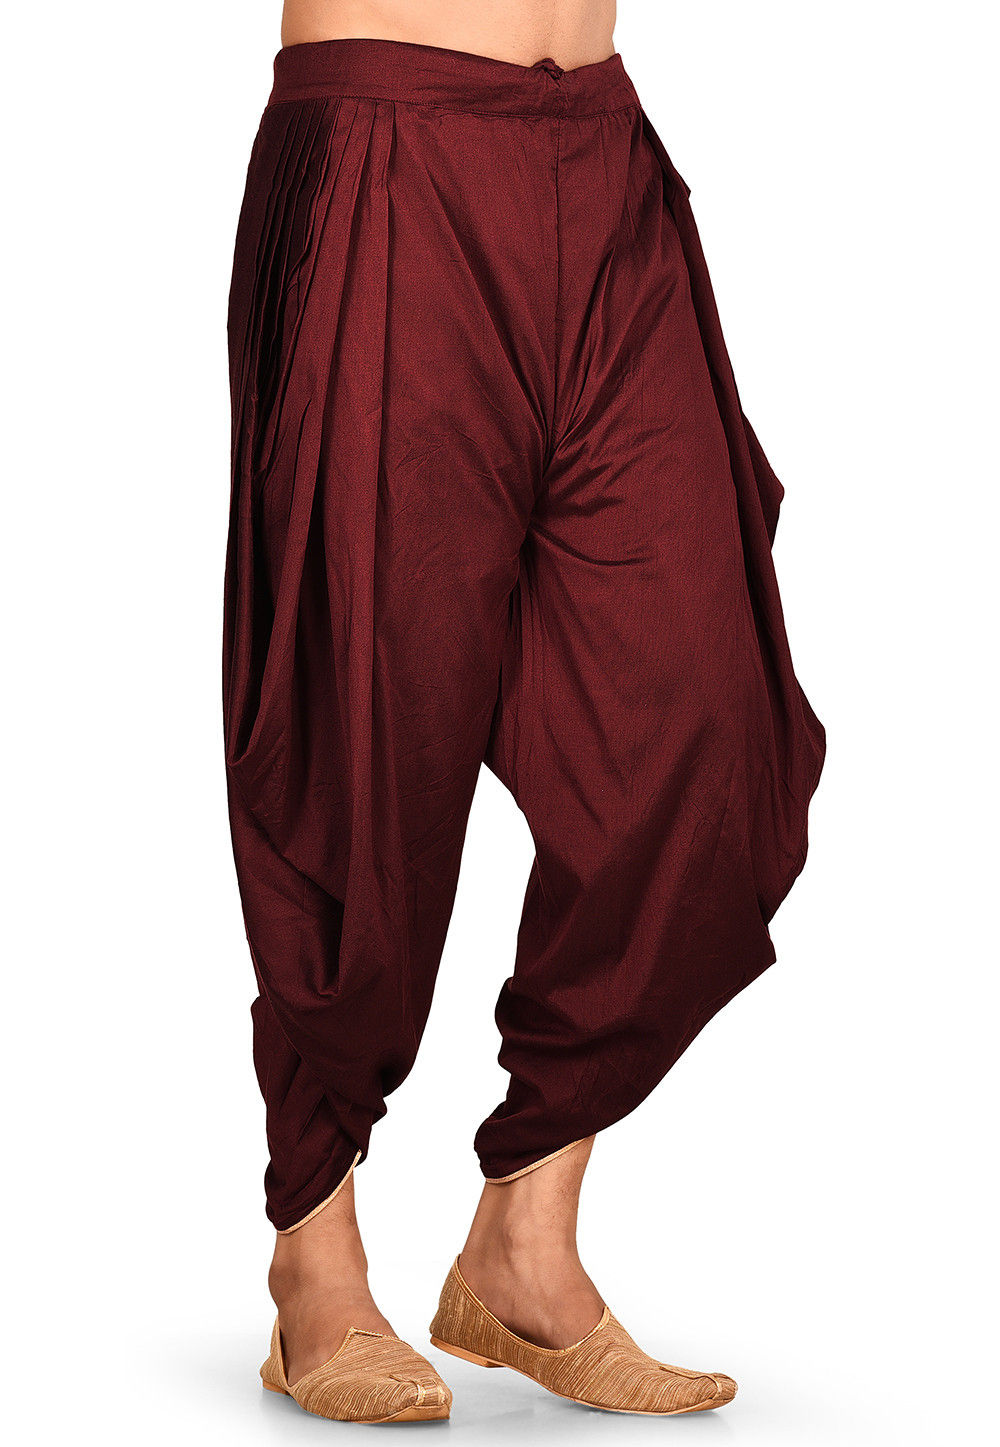 Buy Beige and Maroon Combo of 2 Solid Women Regular Fit Trousers Cotton  Slub for Best Price, Reviews, Free Shipping